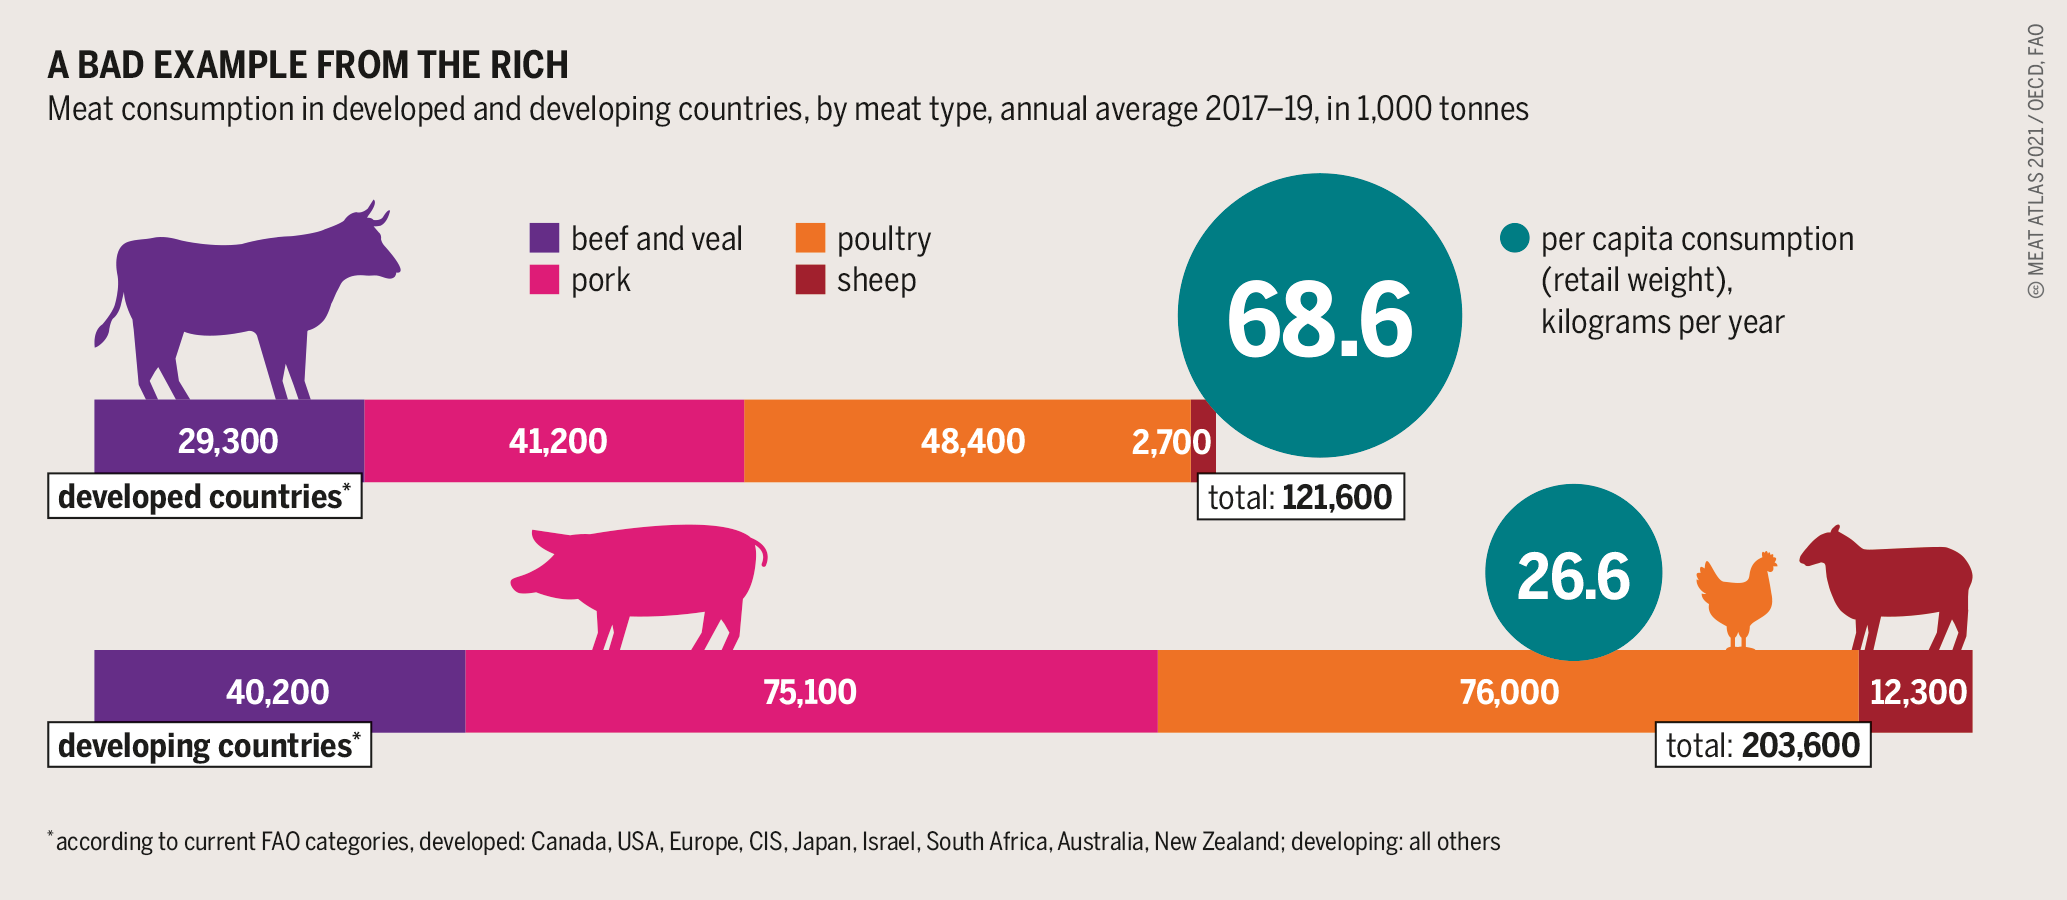 An infographic showing developing countries consume proportionally less meat than developed countries